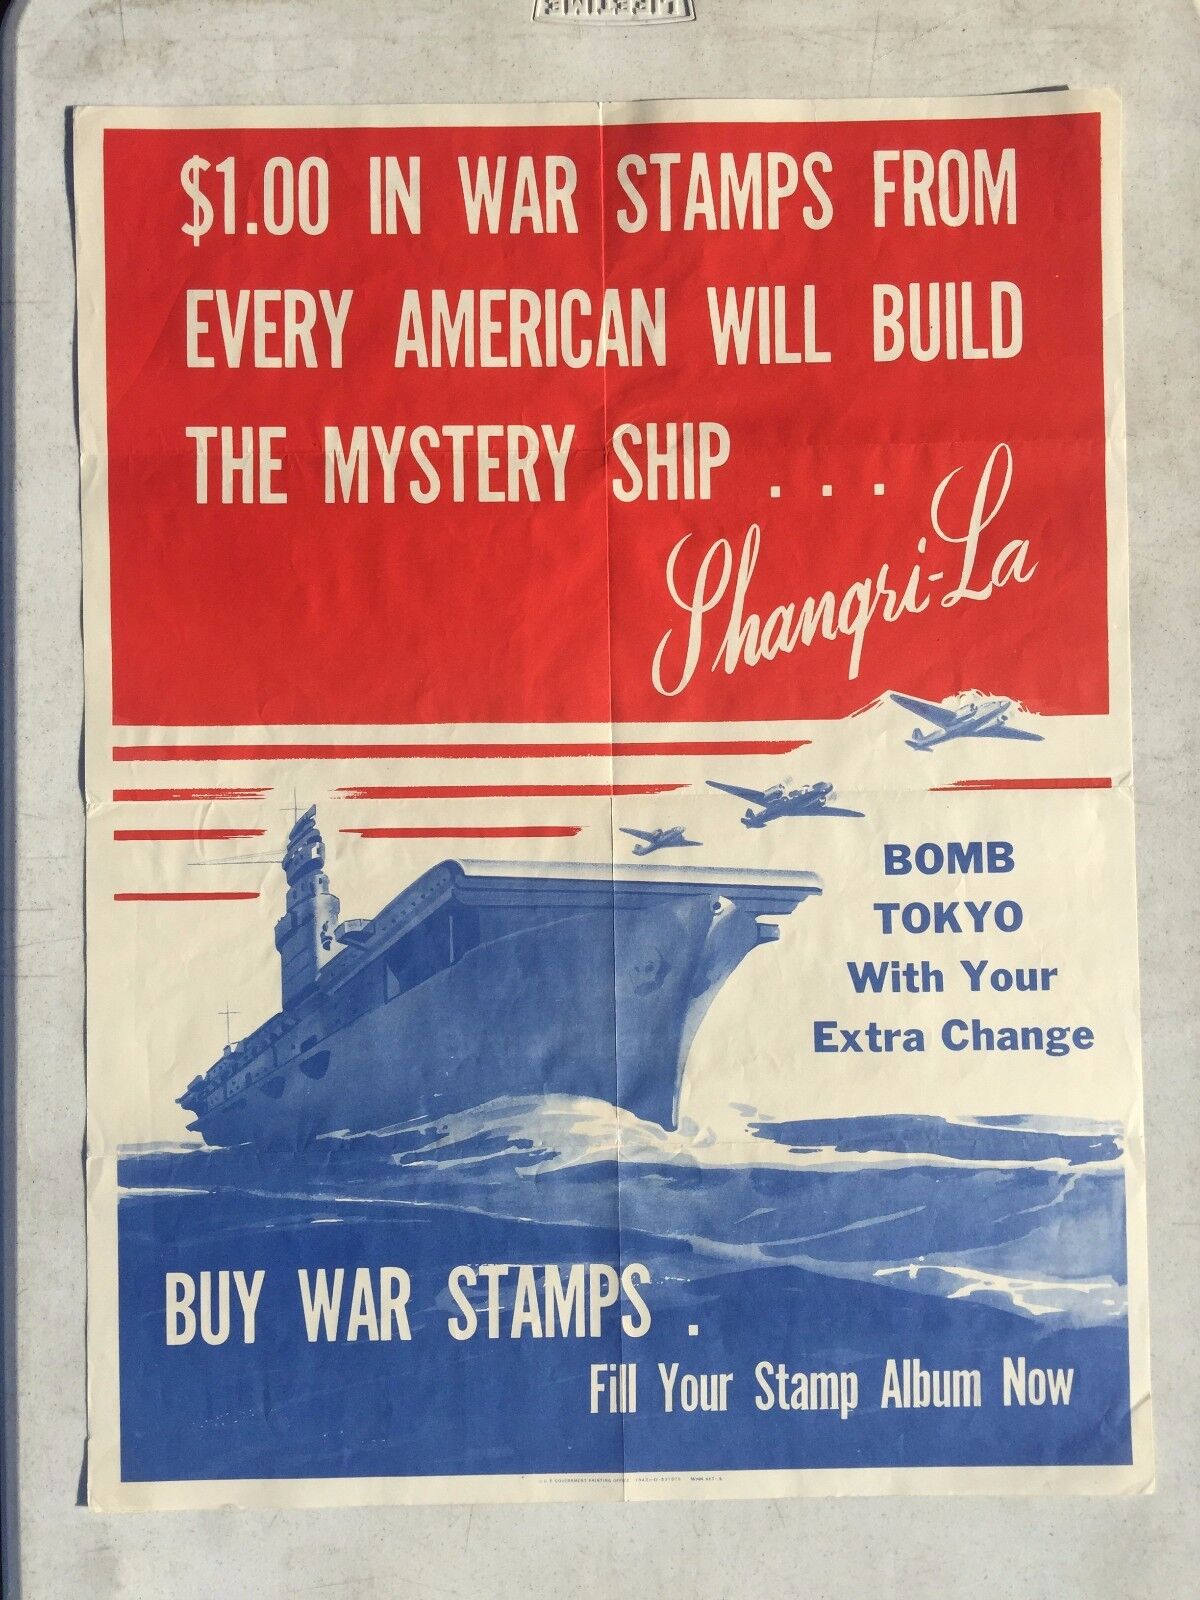 1943 WWII Poster $1 in War Stamps to Build the Mystery Ship